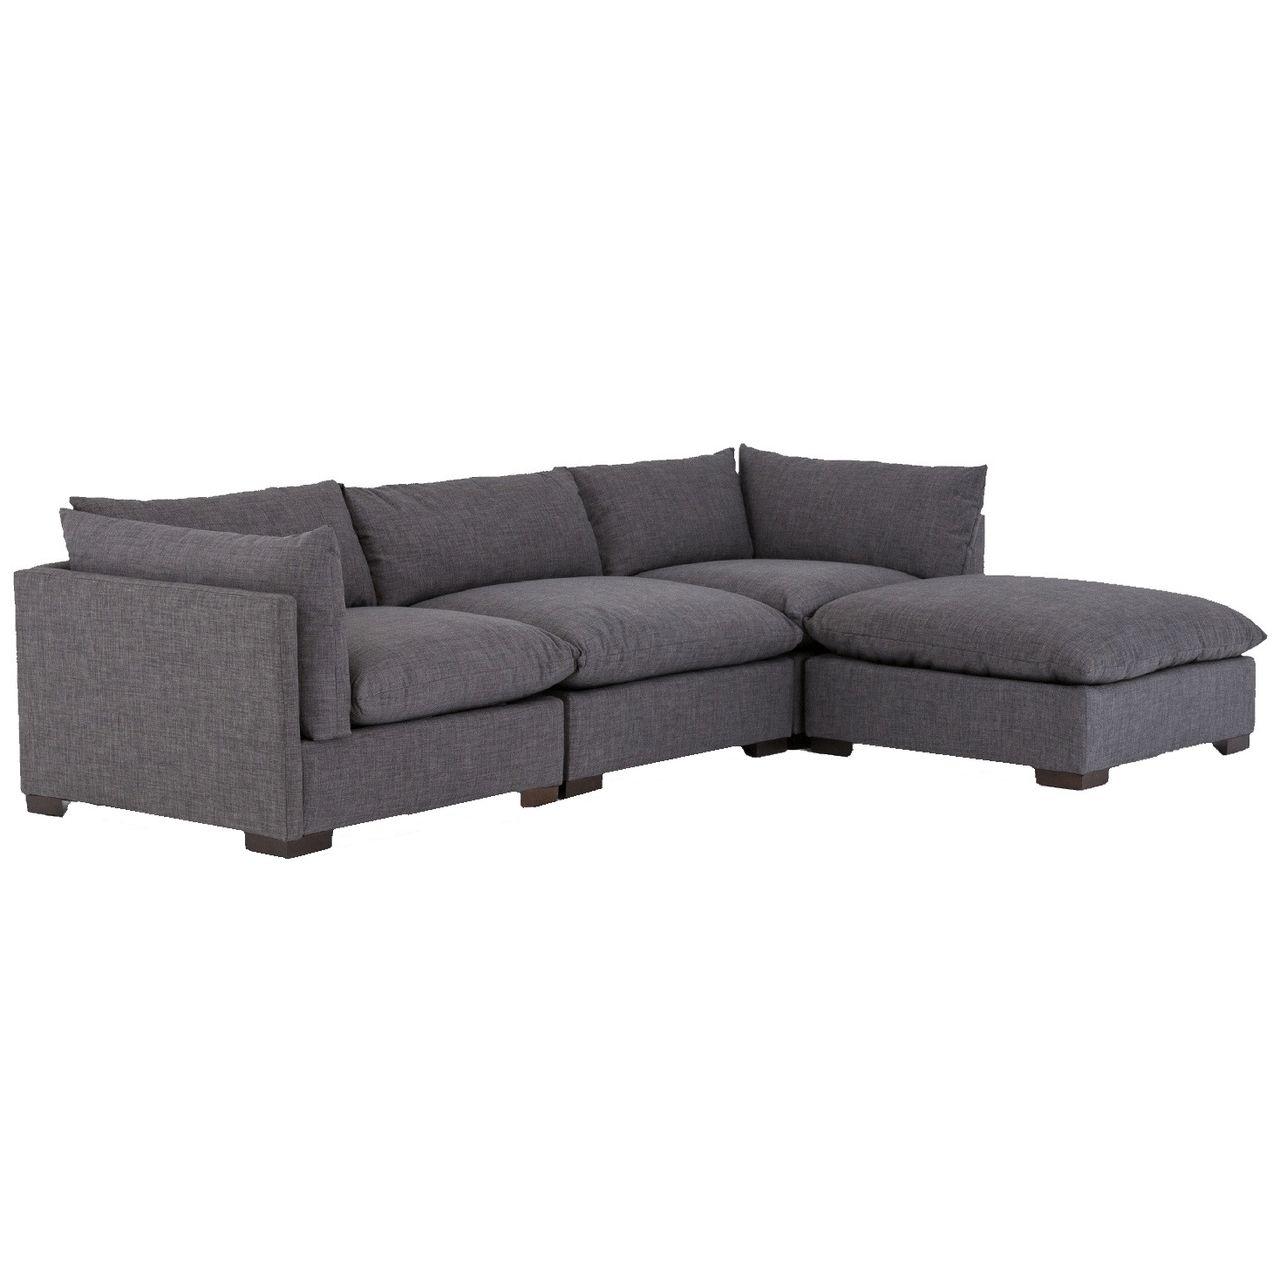 Westworld Modern Gray 4 Piece Modular Lounge Sectional With Regard To 2Pc Burland Contemporary Sectional Sofas Charcoal (View 7 of 15)